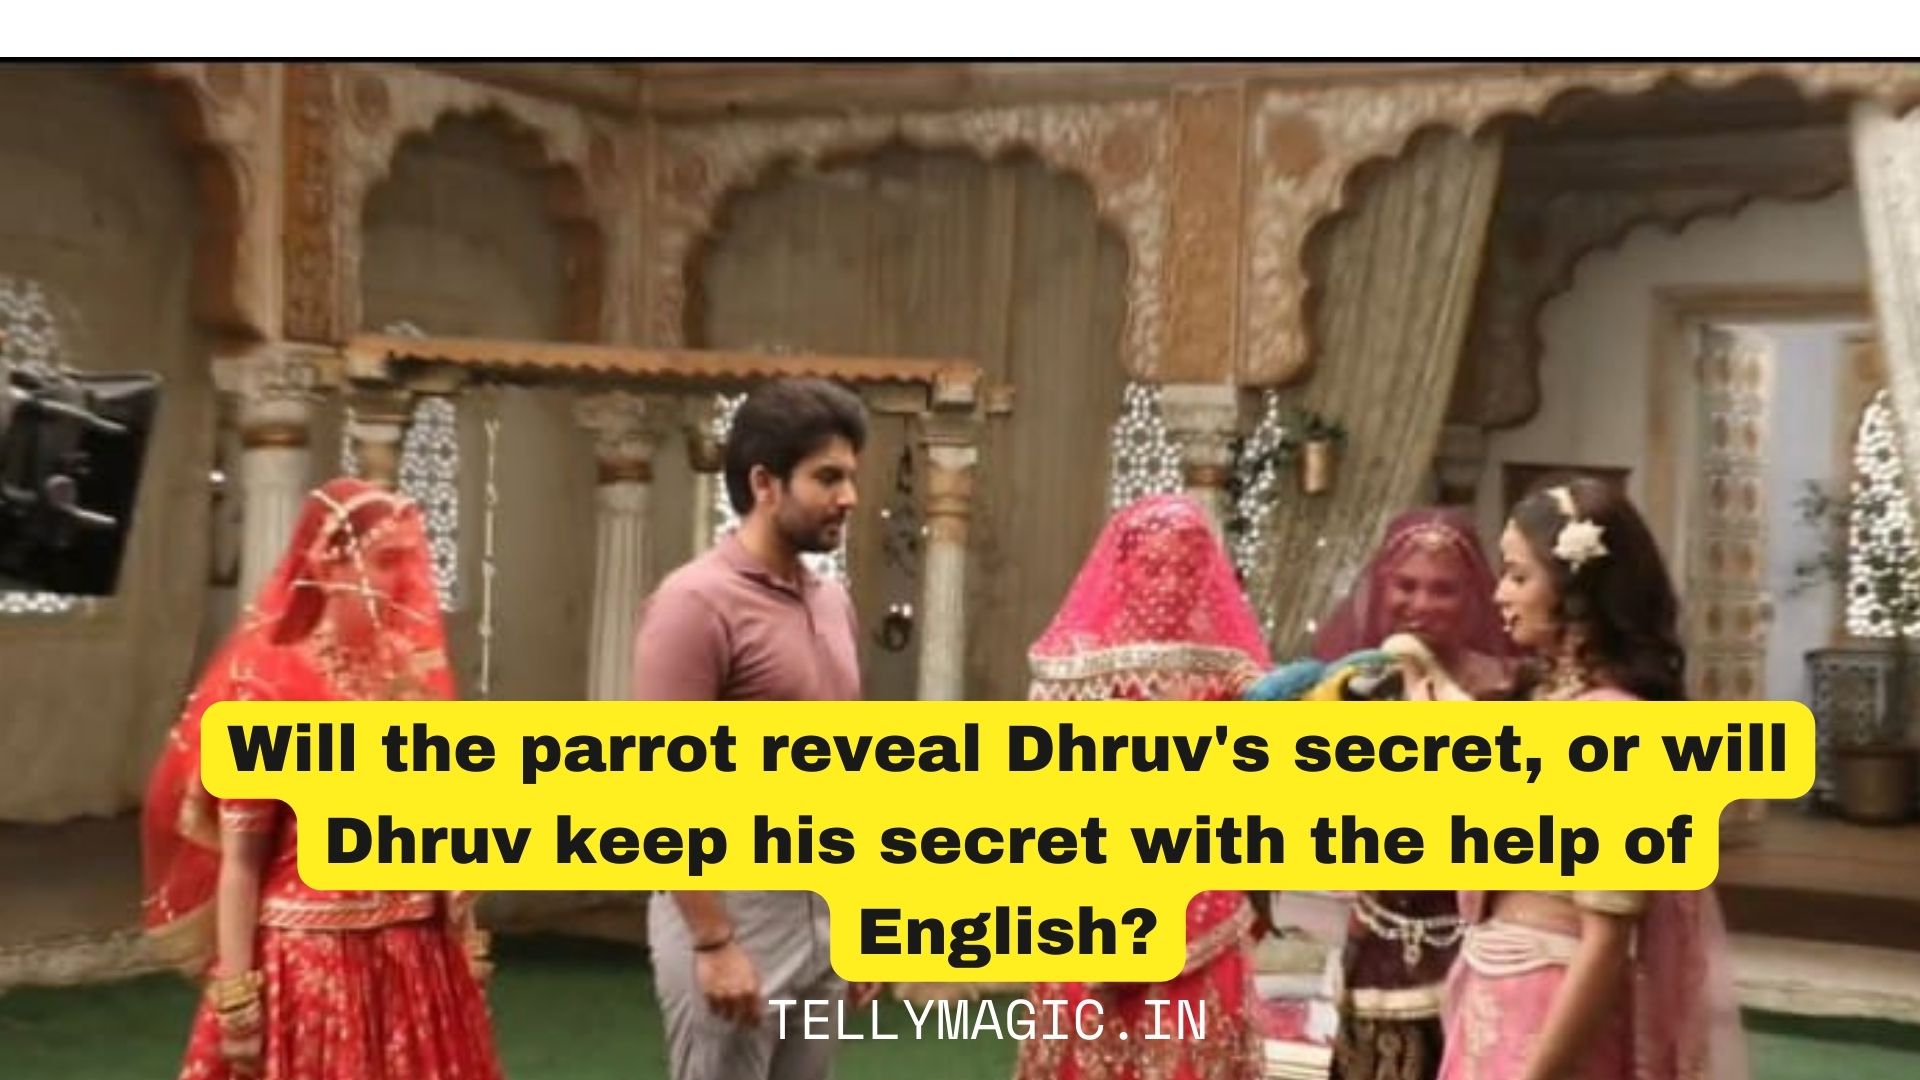 Will the parrot reveal Dhruv’s secret, or will Dhruv keep his secret with the help of English?